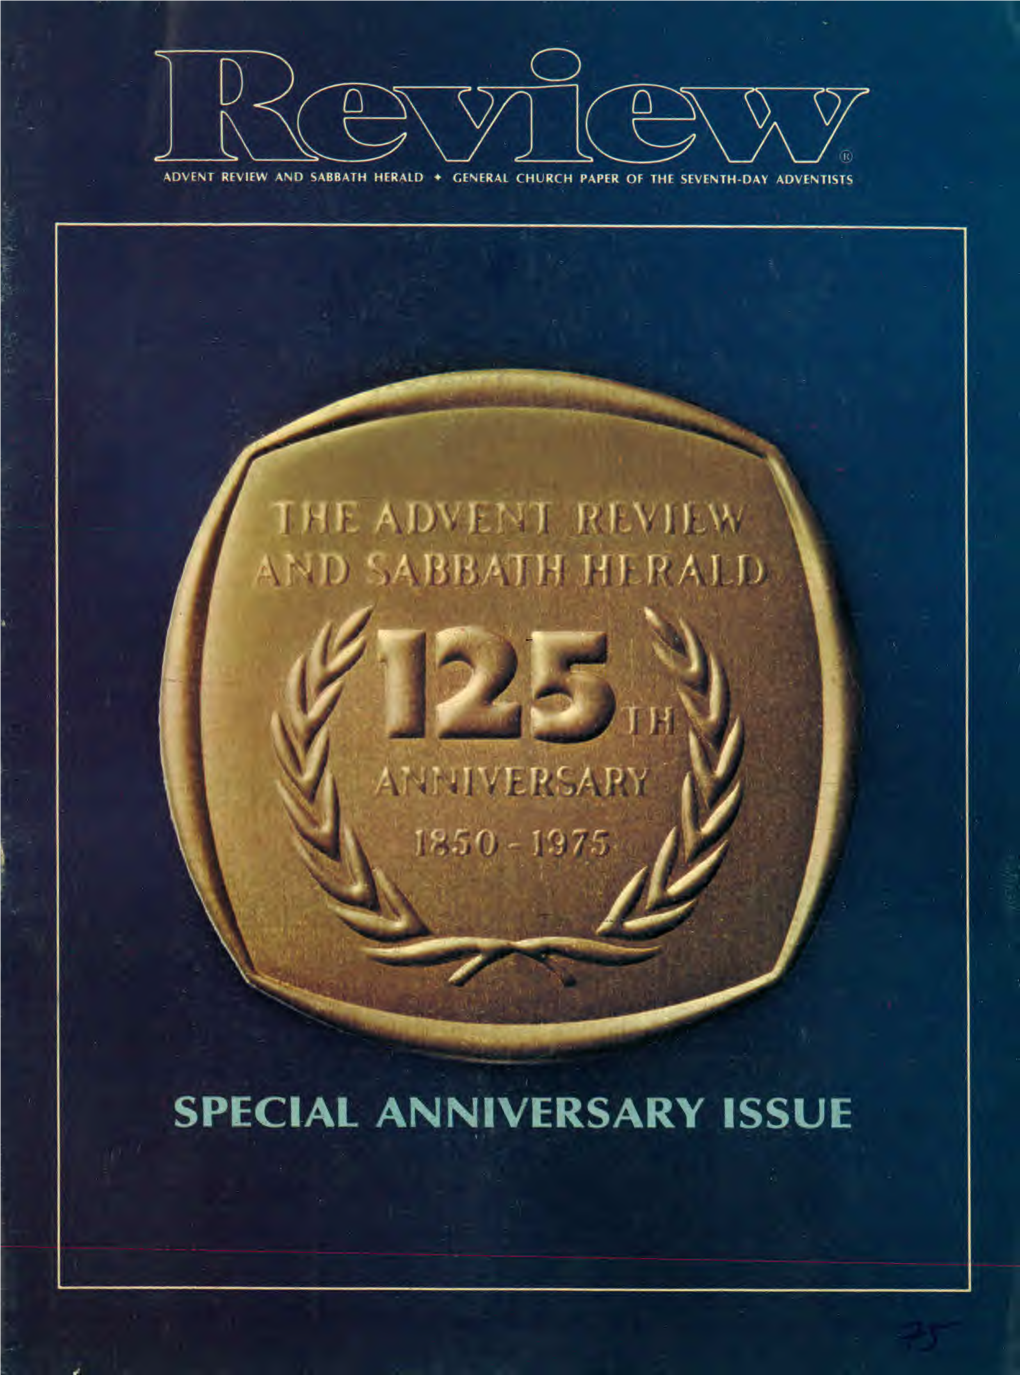 Adventist Review Anniversary Issue for 1975